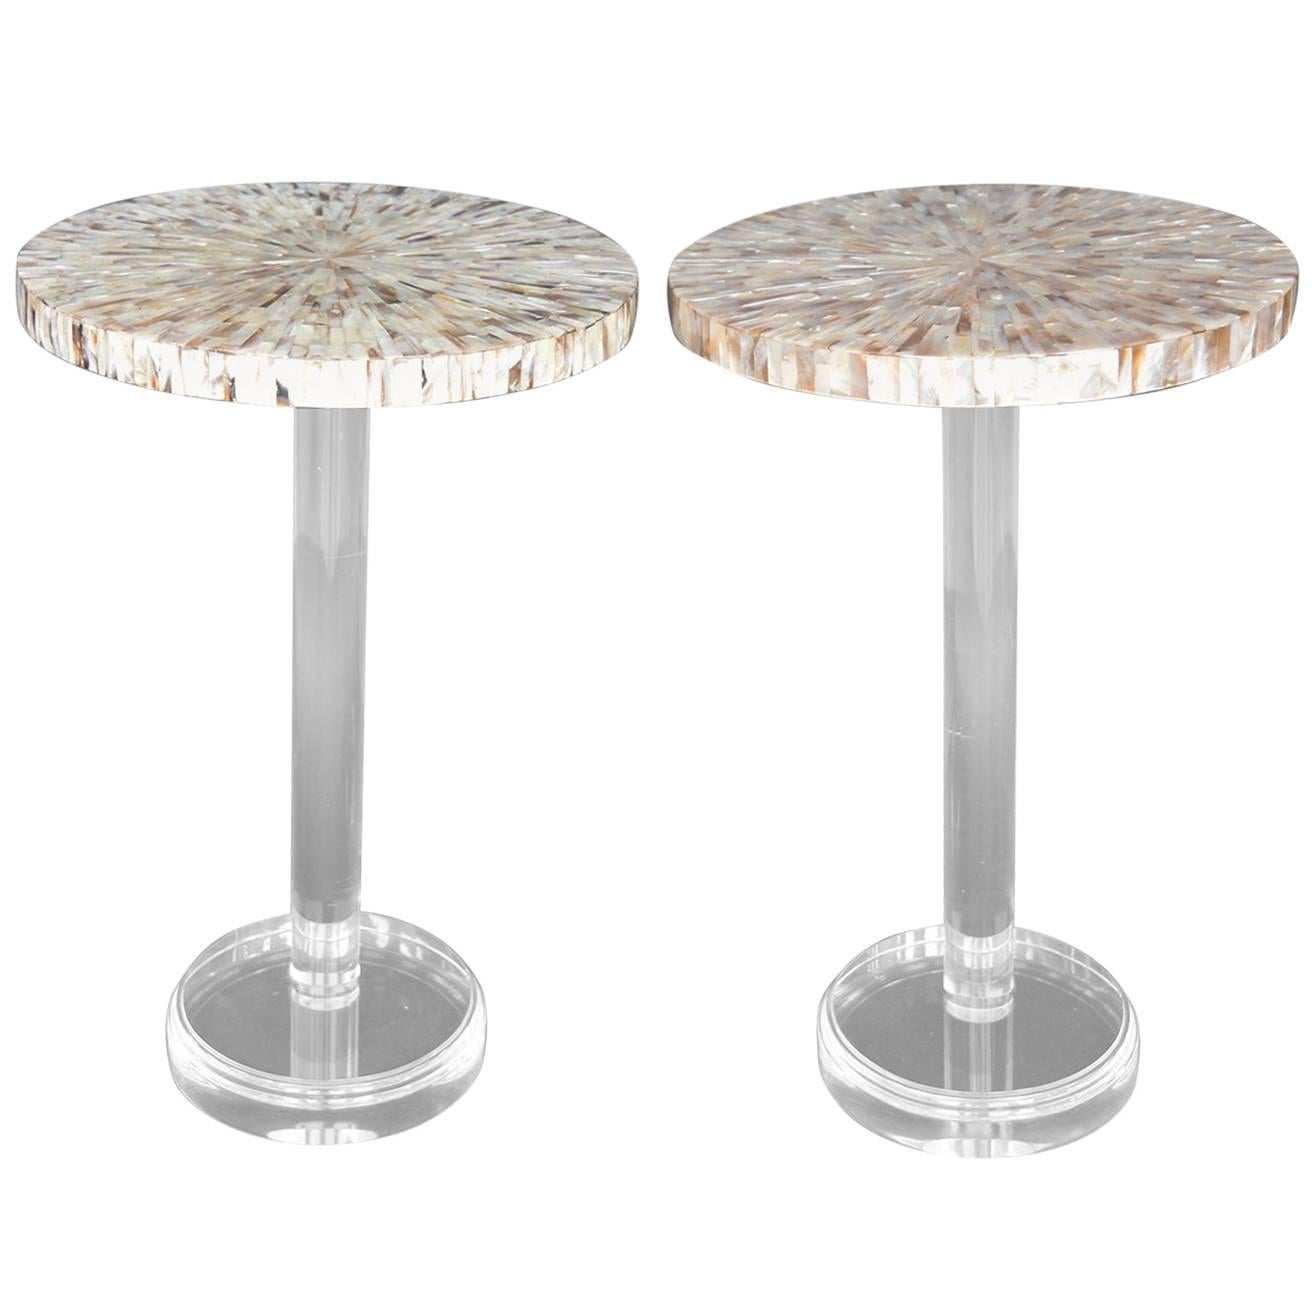 Pair of Mother-of-Pearl Side Tables with Lucite Bases